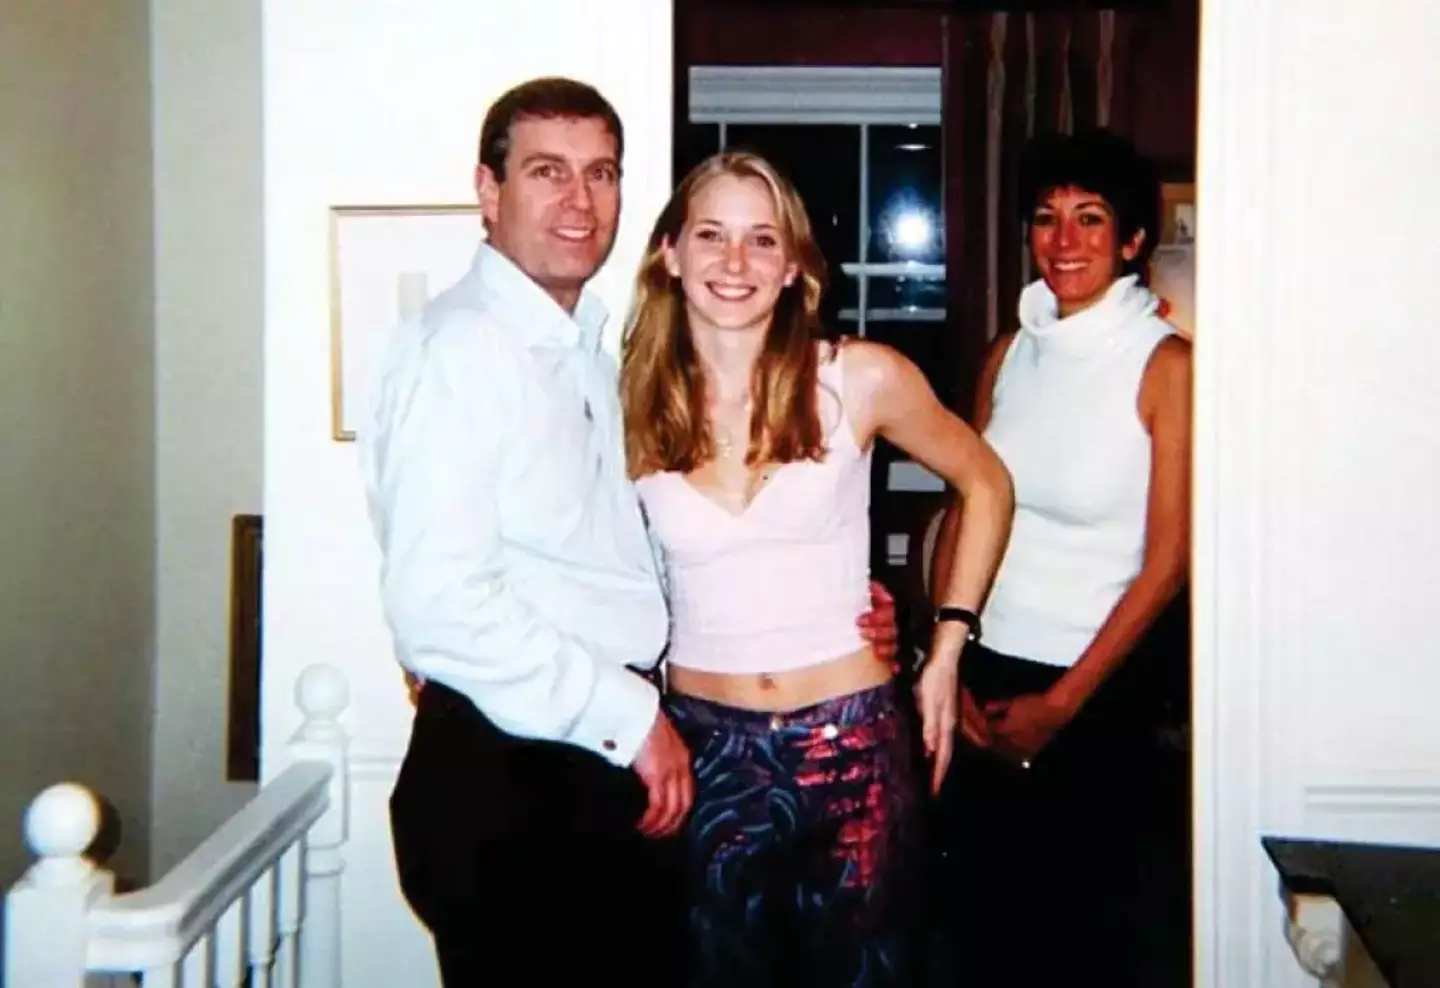 Prince Andrew claims to have never met Roberts, despite paying her millions to settle out of court.